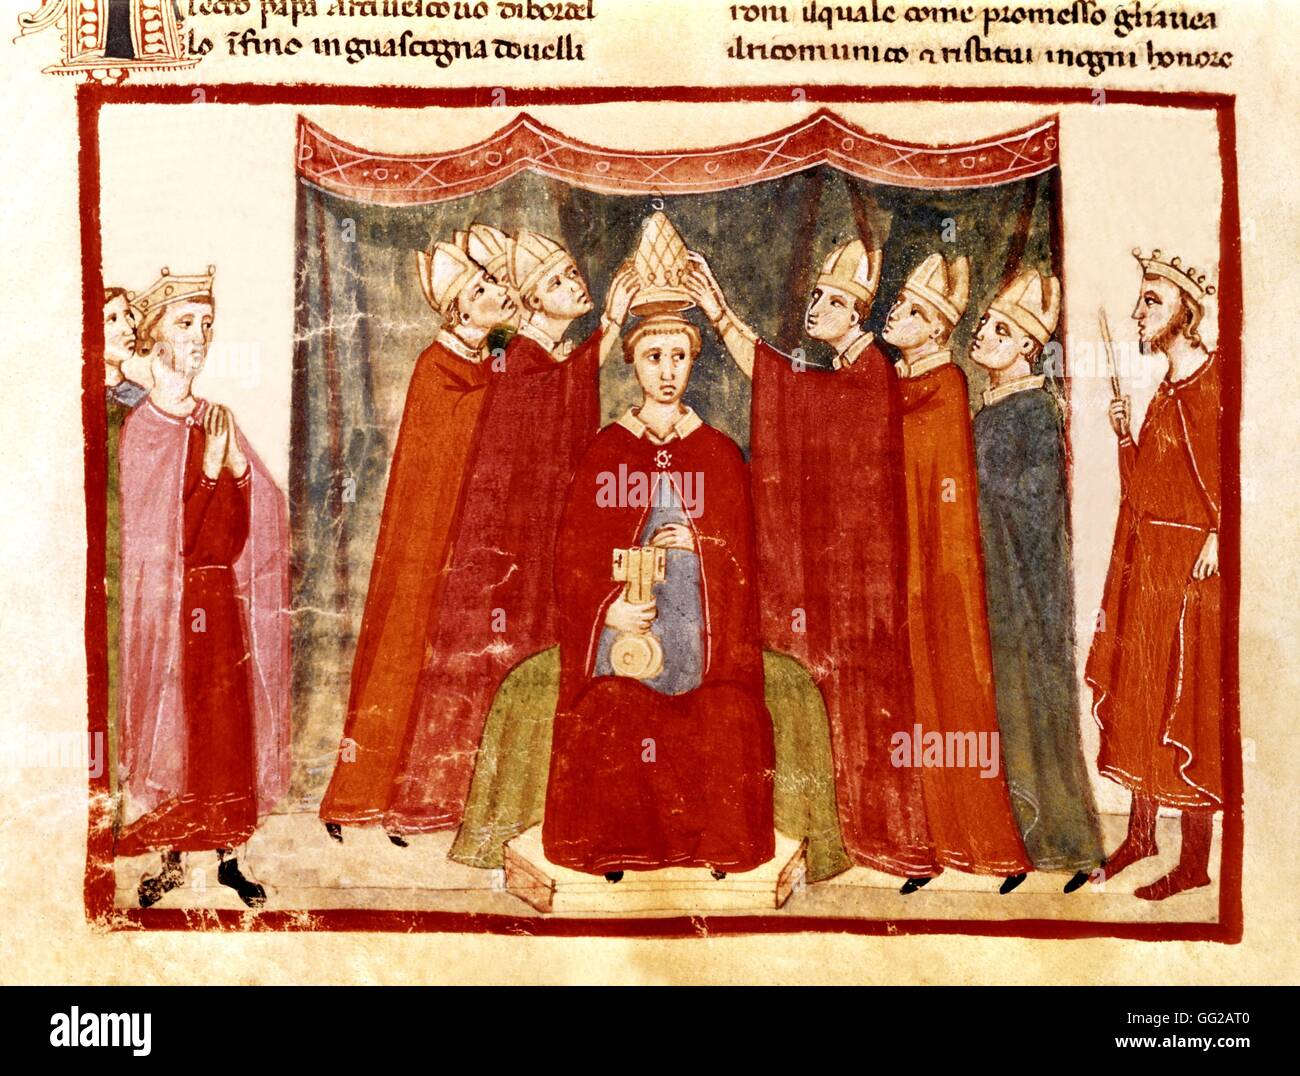 Coronation of a pope 15th century Italy Vatican Library Stock Photo